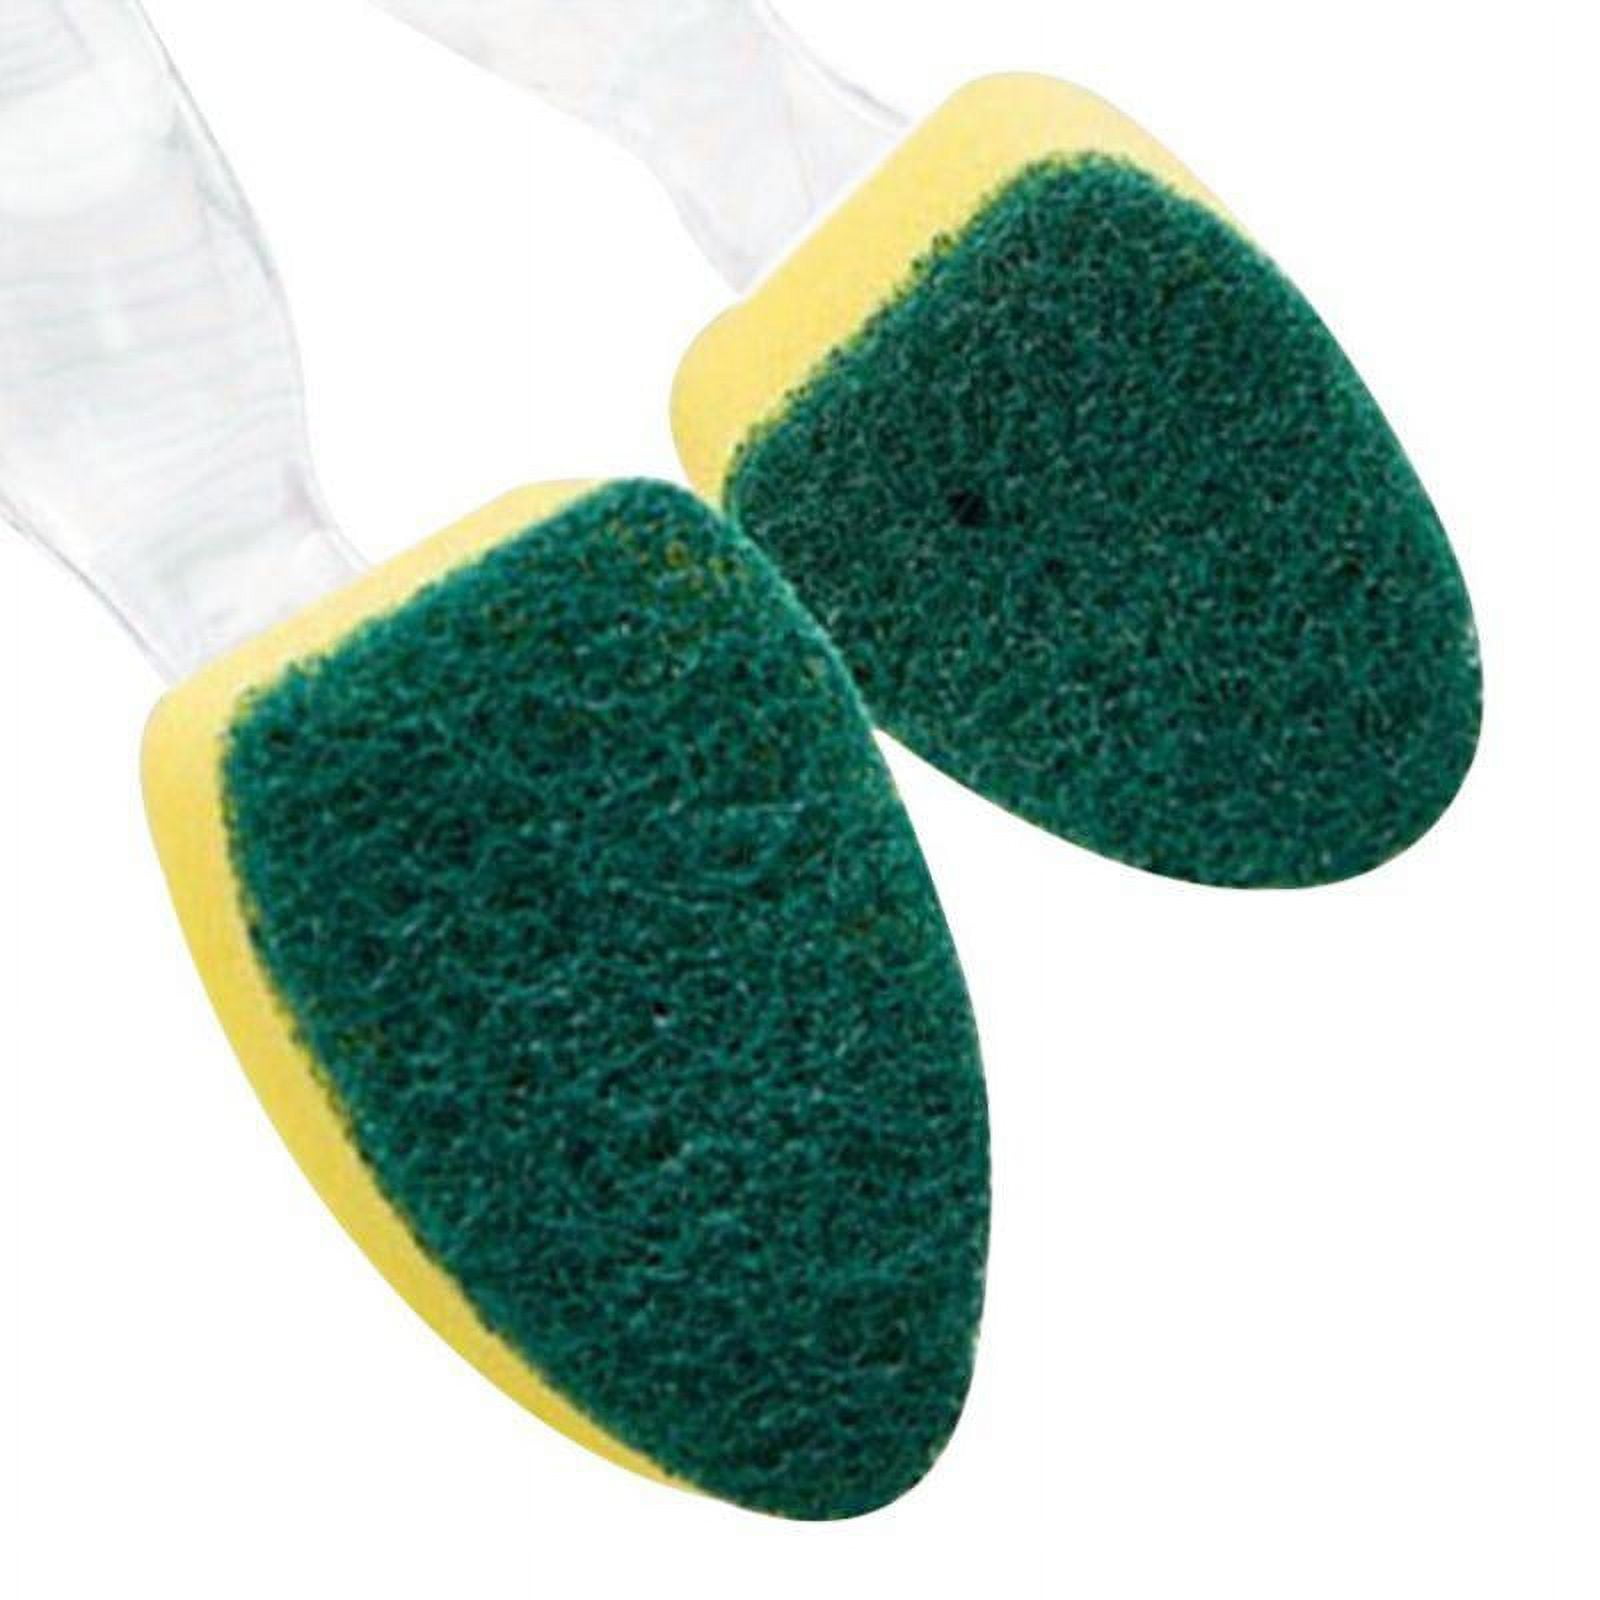 Ditch the dish sponge: Researchers say kitchen brushes are less